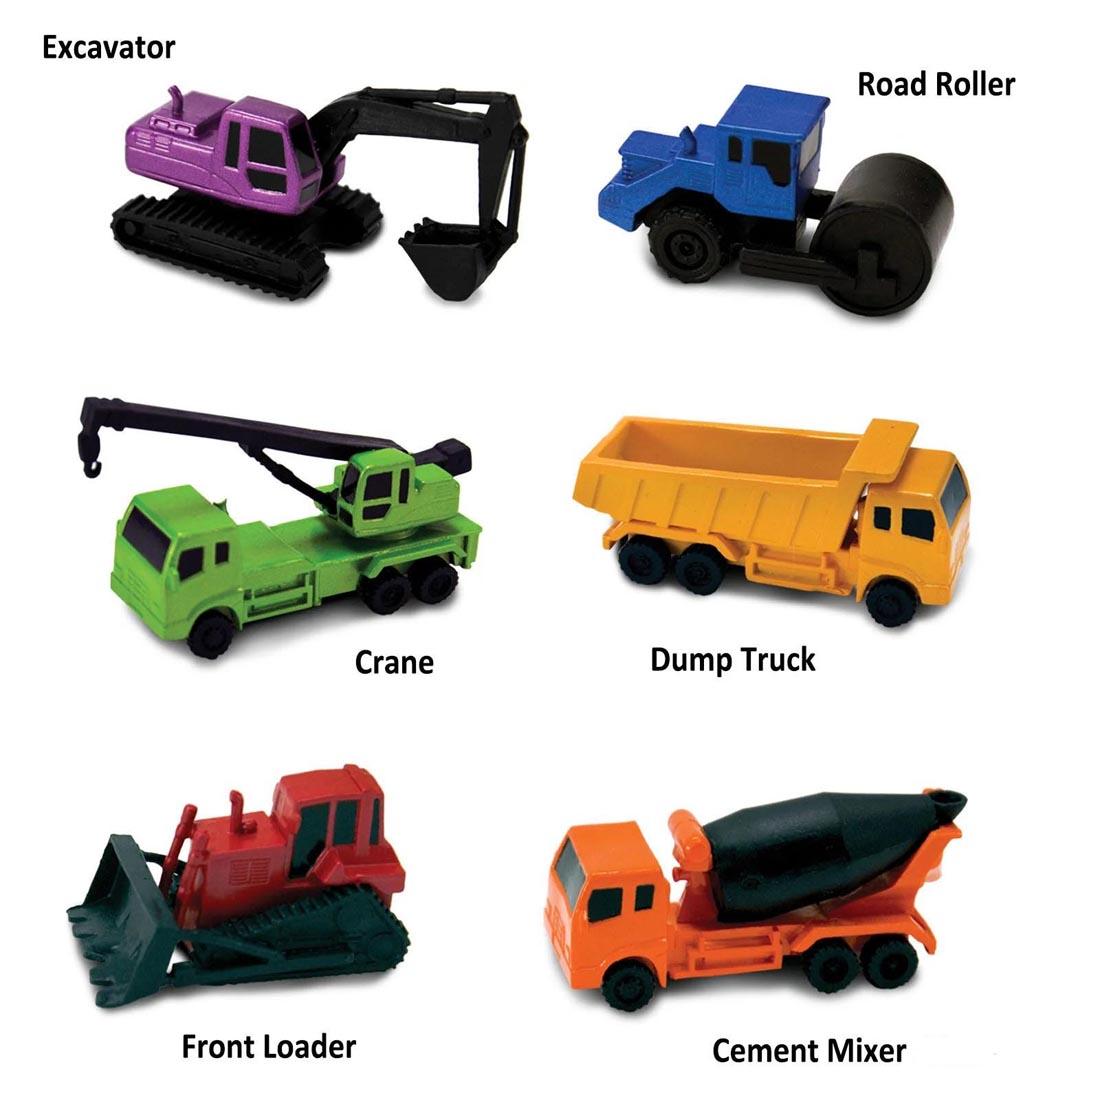 Construction Vehicles Figurine Set labeled with Excavator; Road Roller; Crane; Dump Truck; Front Loader; Cement Mixer